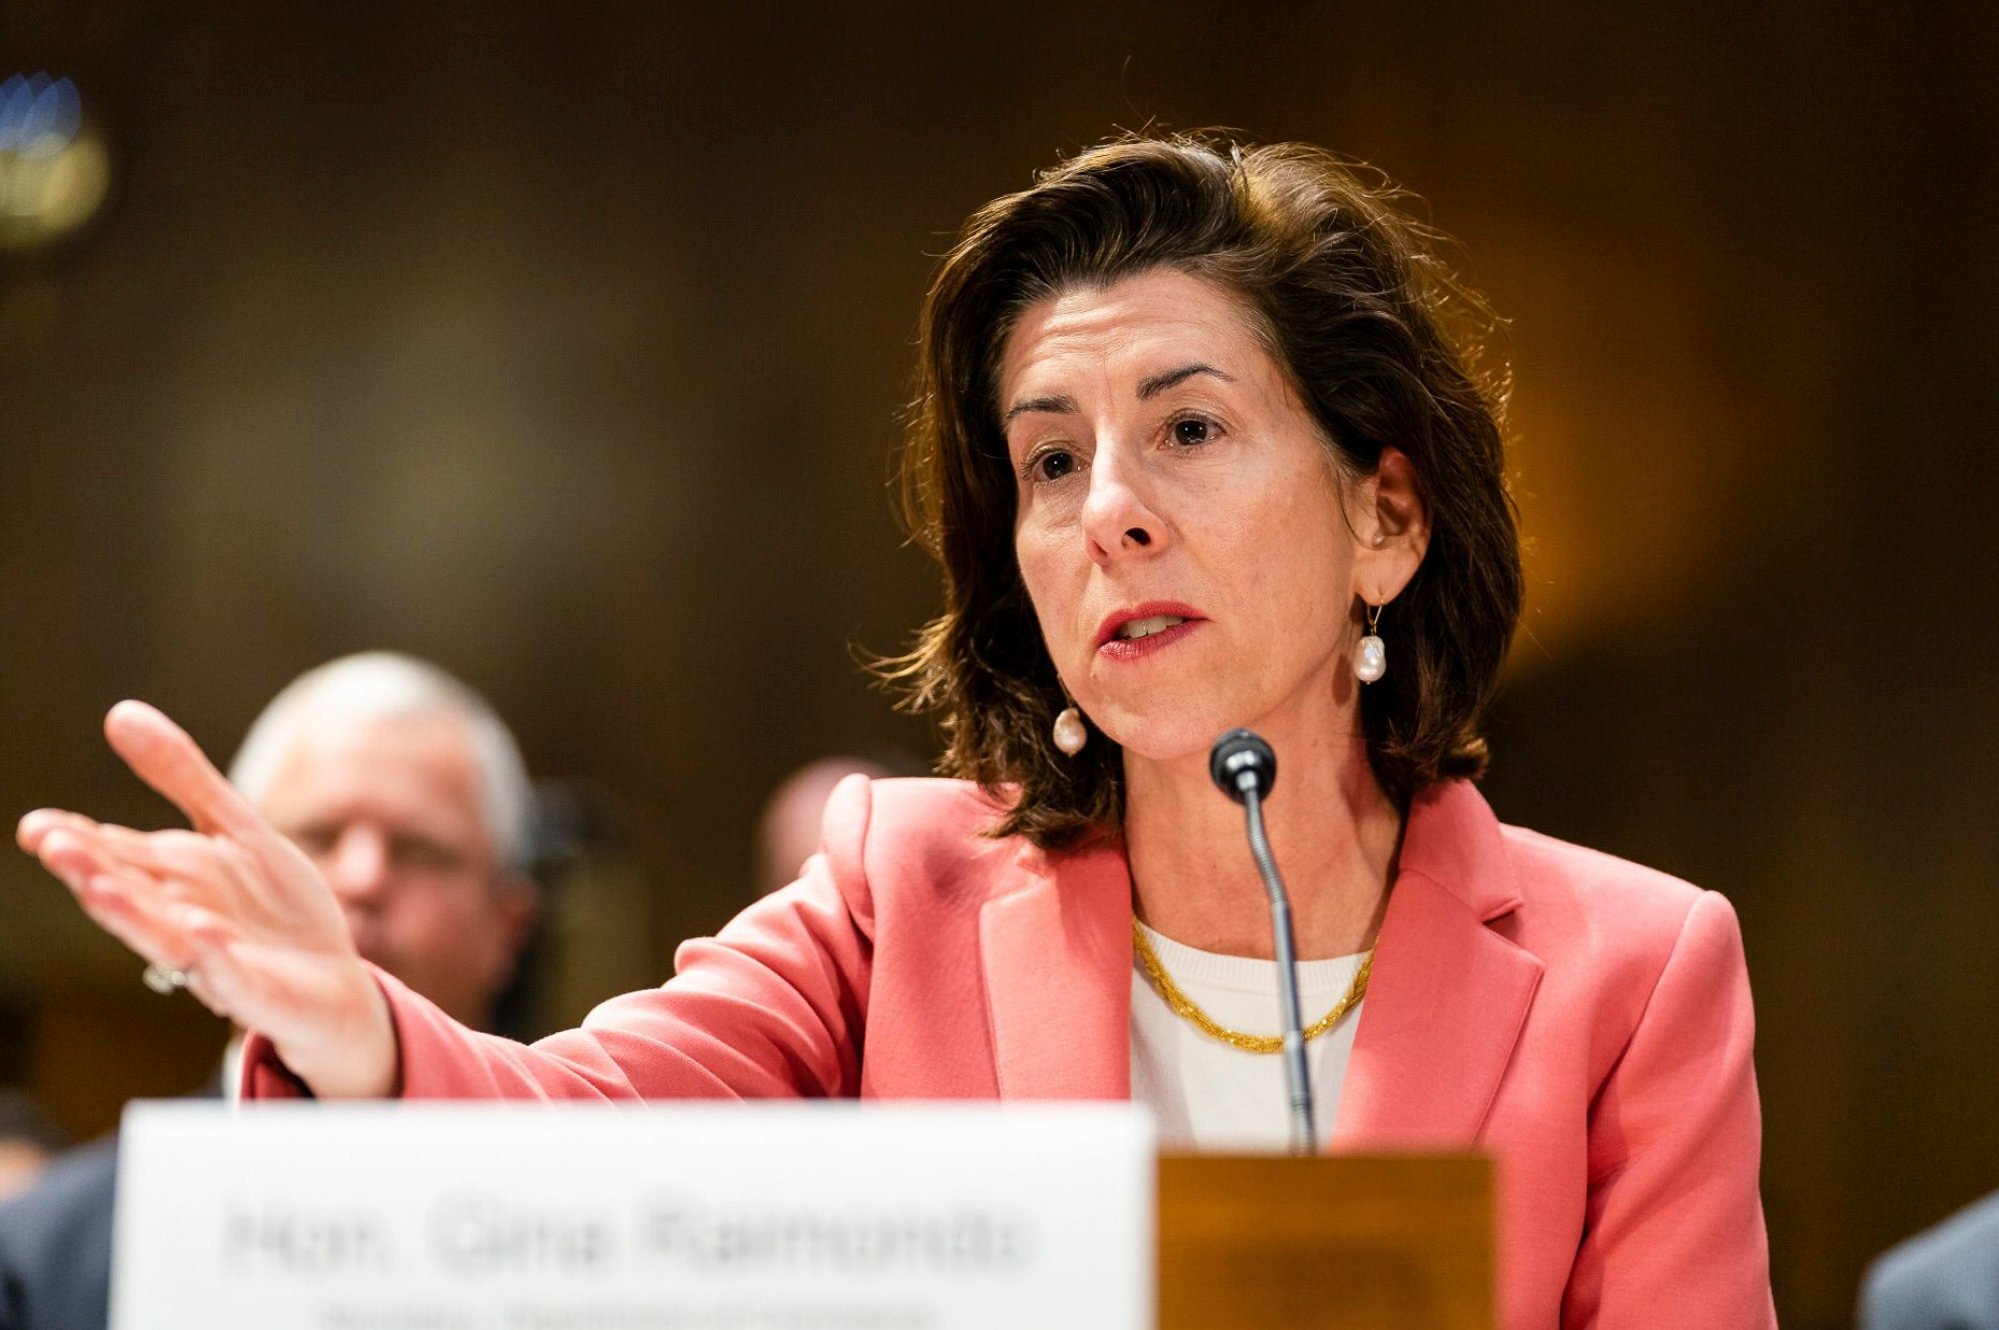 In a meeting with Chinese Commerce Minister Wang Wentao, US commerce secretary Gina Raimondo, pictured, raised concerns about recent actions by Beijing against US companies operating in China, according to a US government statement. Photo: Bloomberg